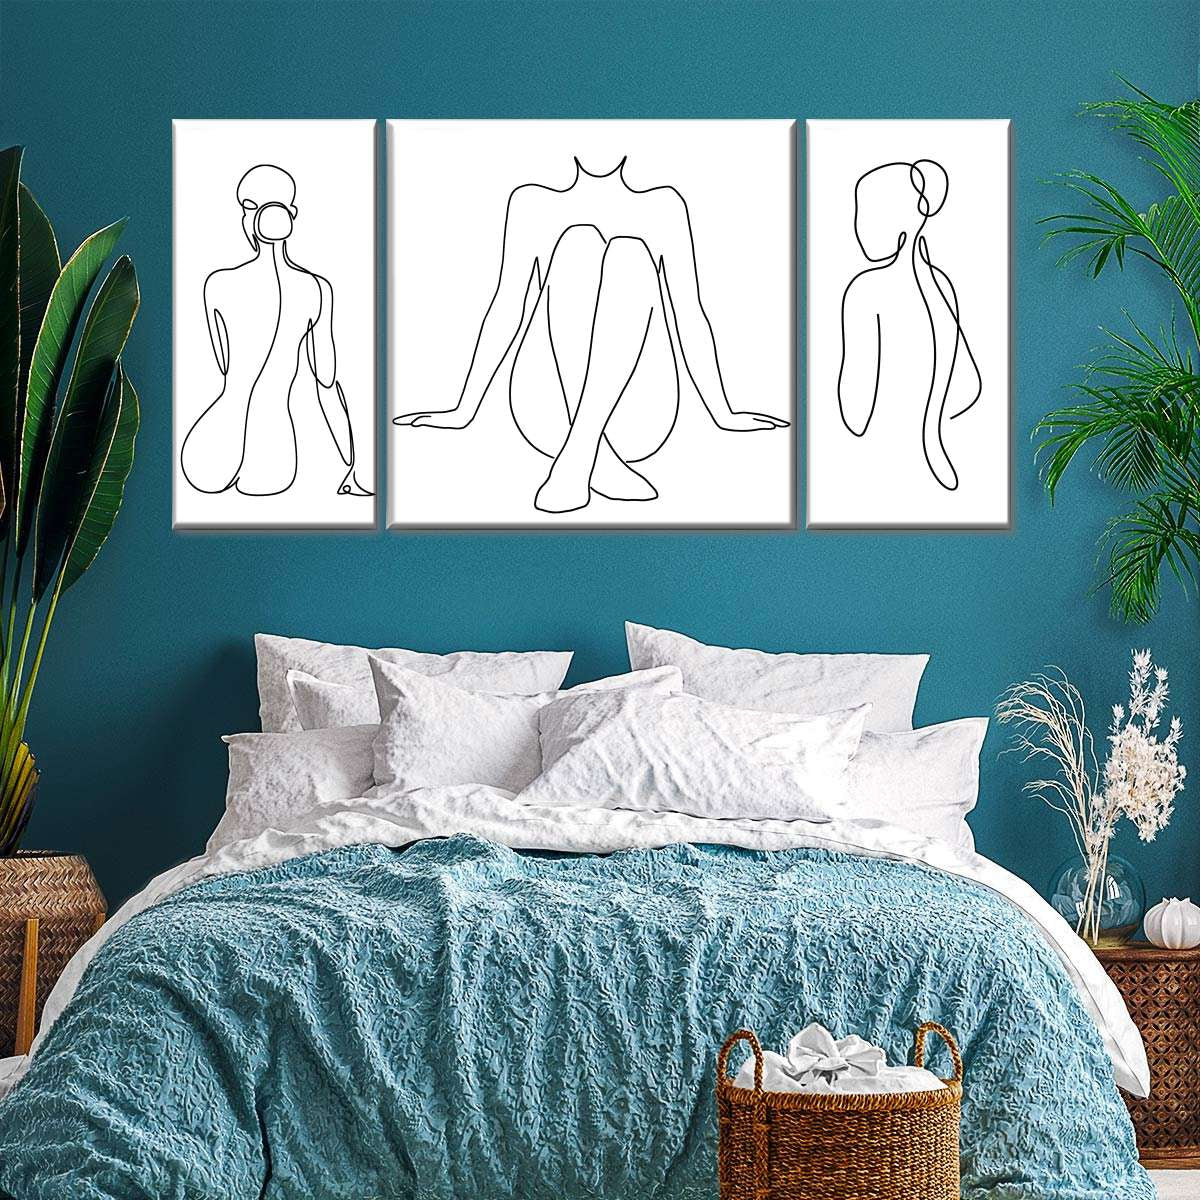 Pair Single Line Wall Art with These Color Schemes